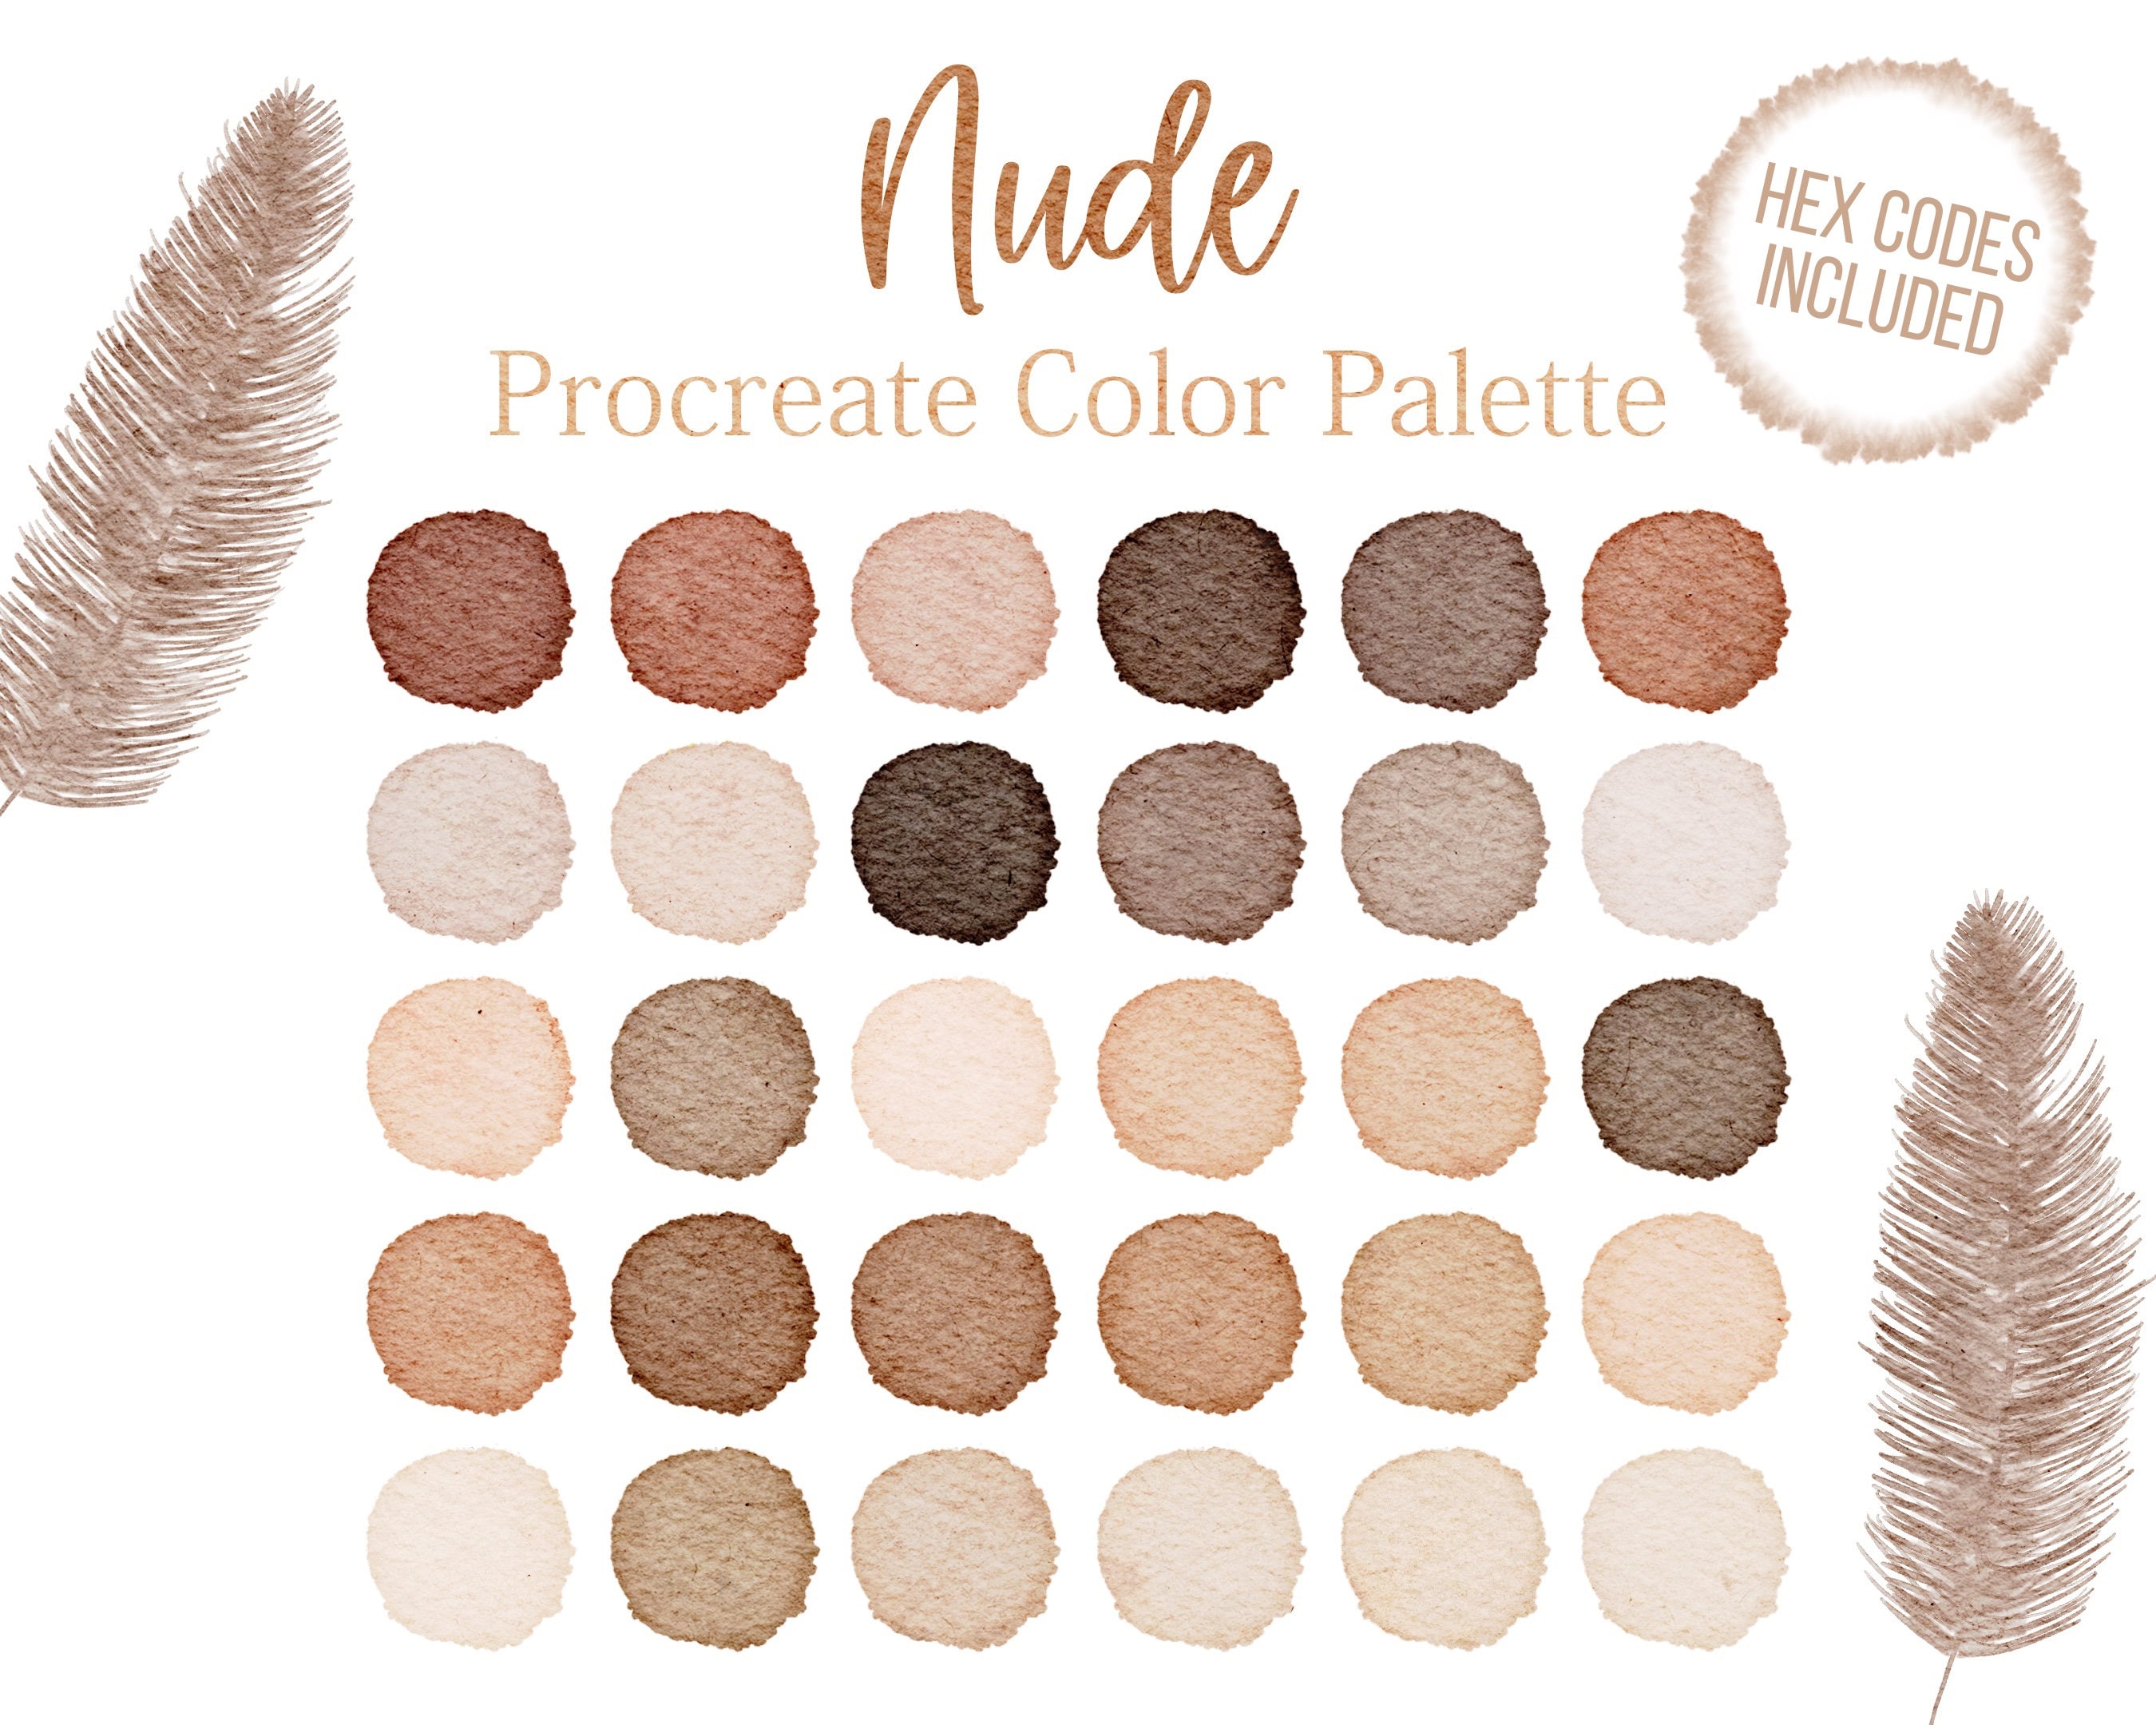 1. Neutral shades like nude or beige - wide 7